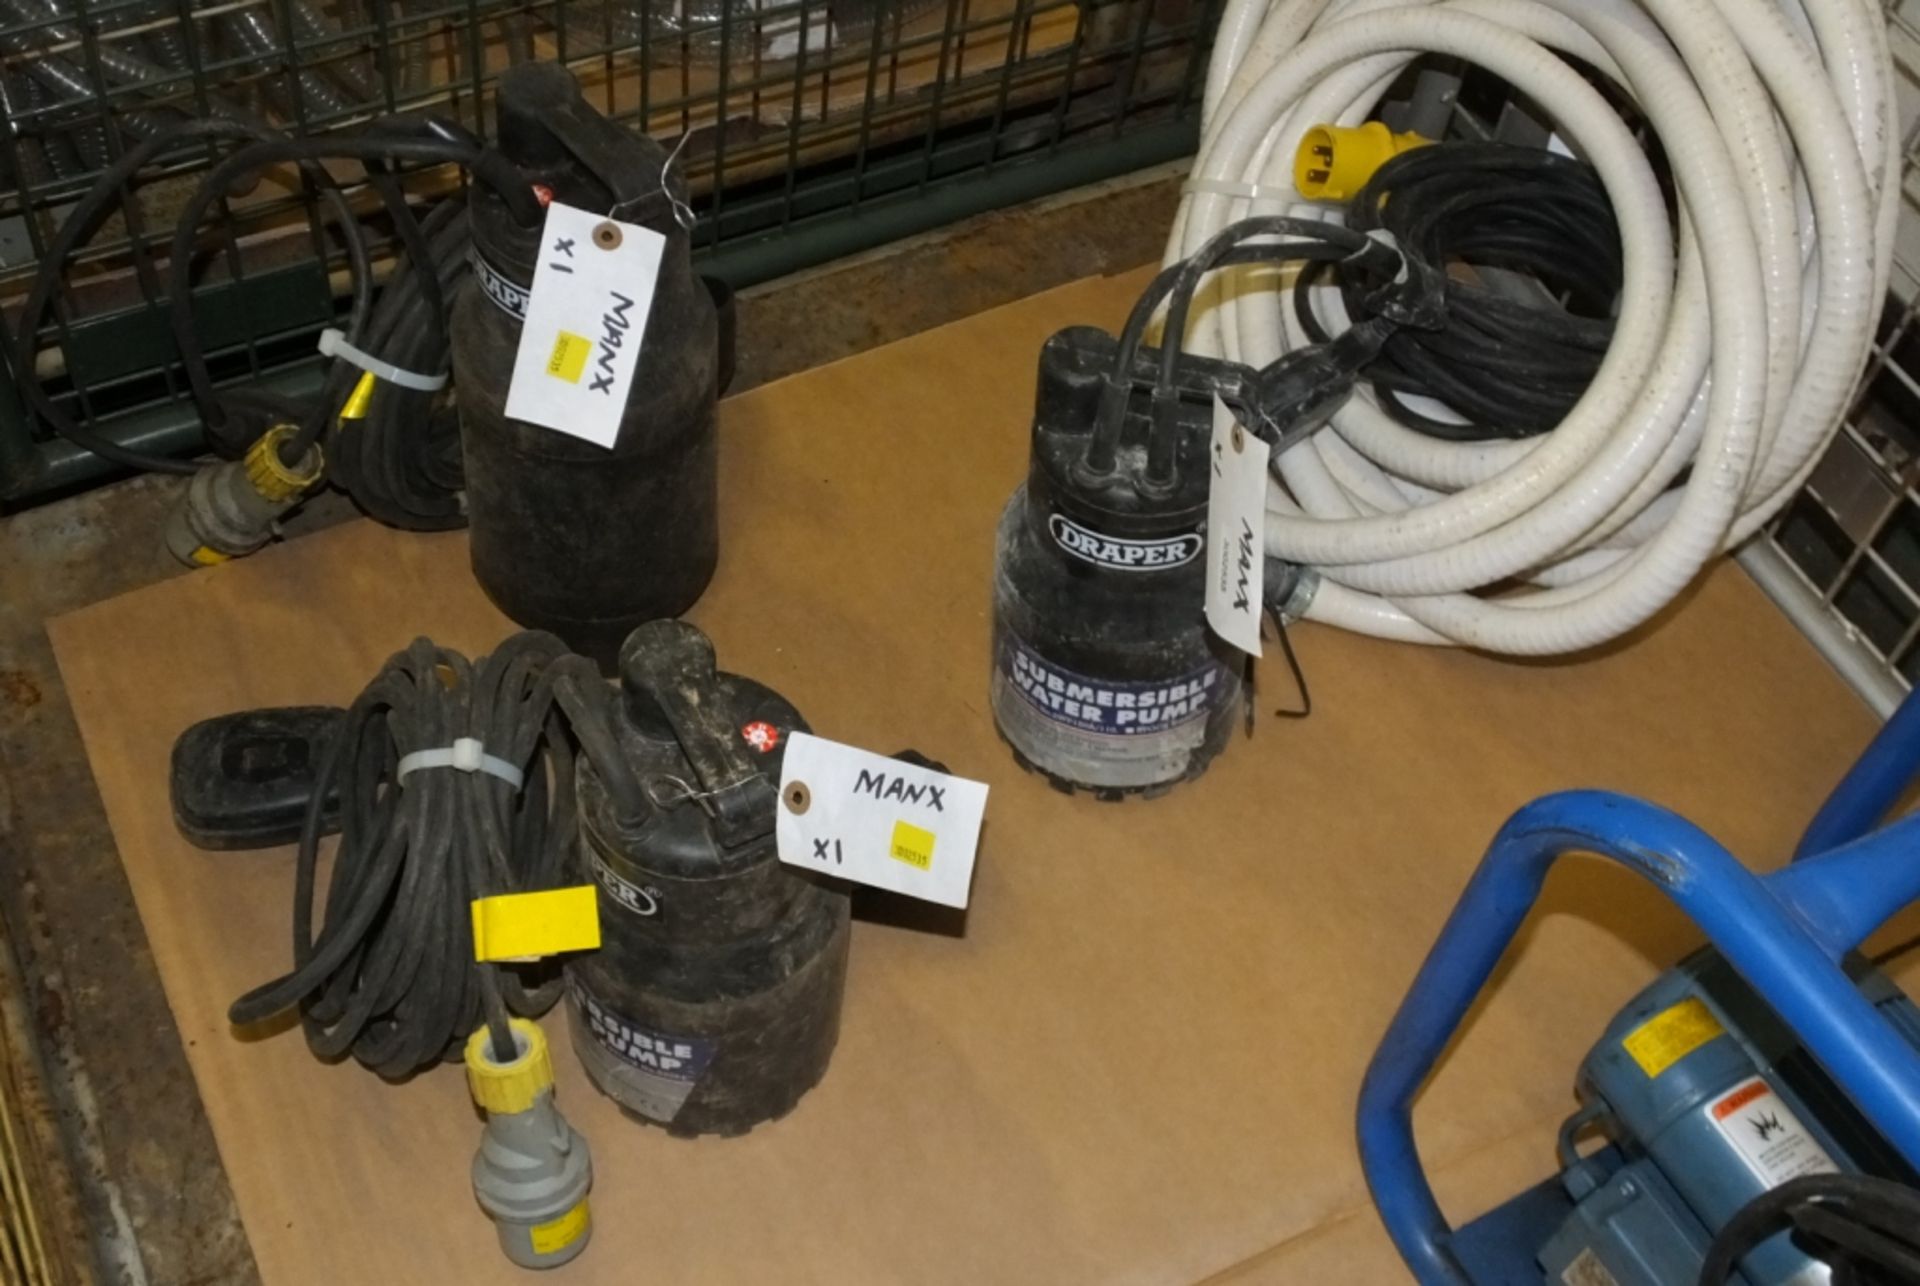 Mechanical Spares, 3x Draper Submersible Water Pumps 110v - Image 4 of 5